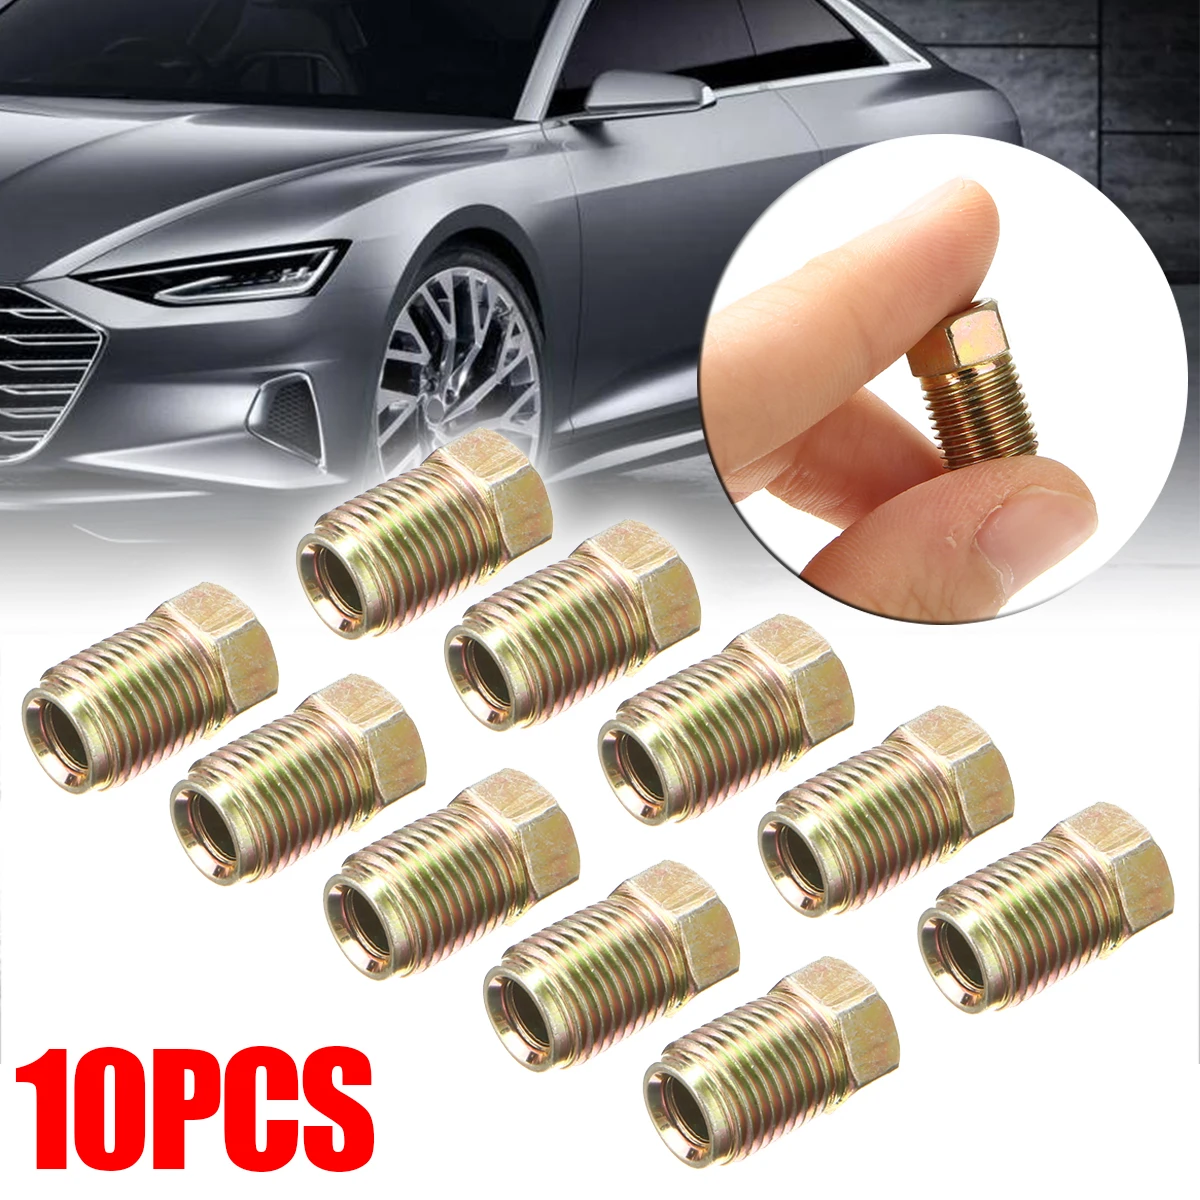 10pcs/set10mm x 1mm Male Short Brake Pipe Screw Nuts for 3/16 Inch Metric Braking Tubes Nuts Bolts Accessories